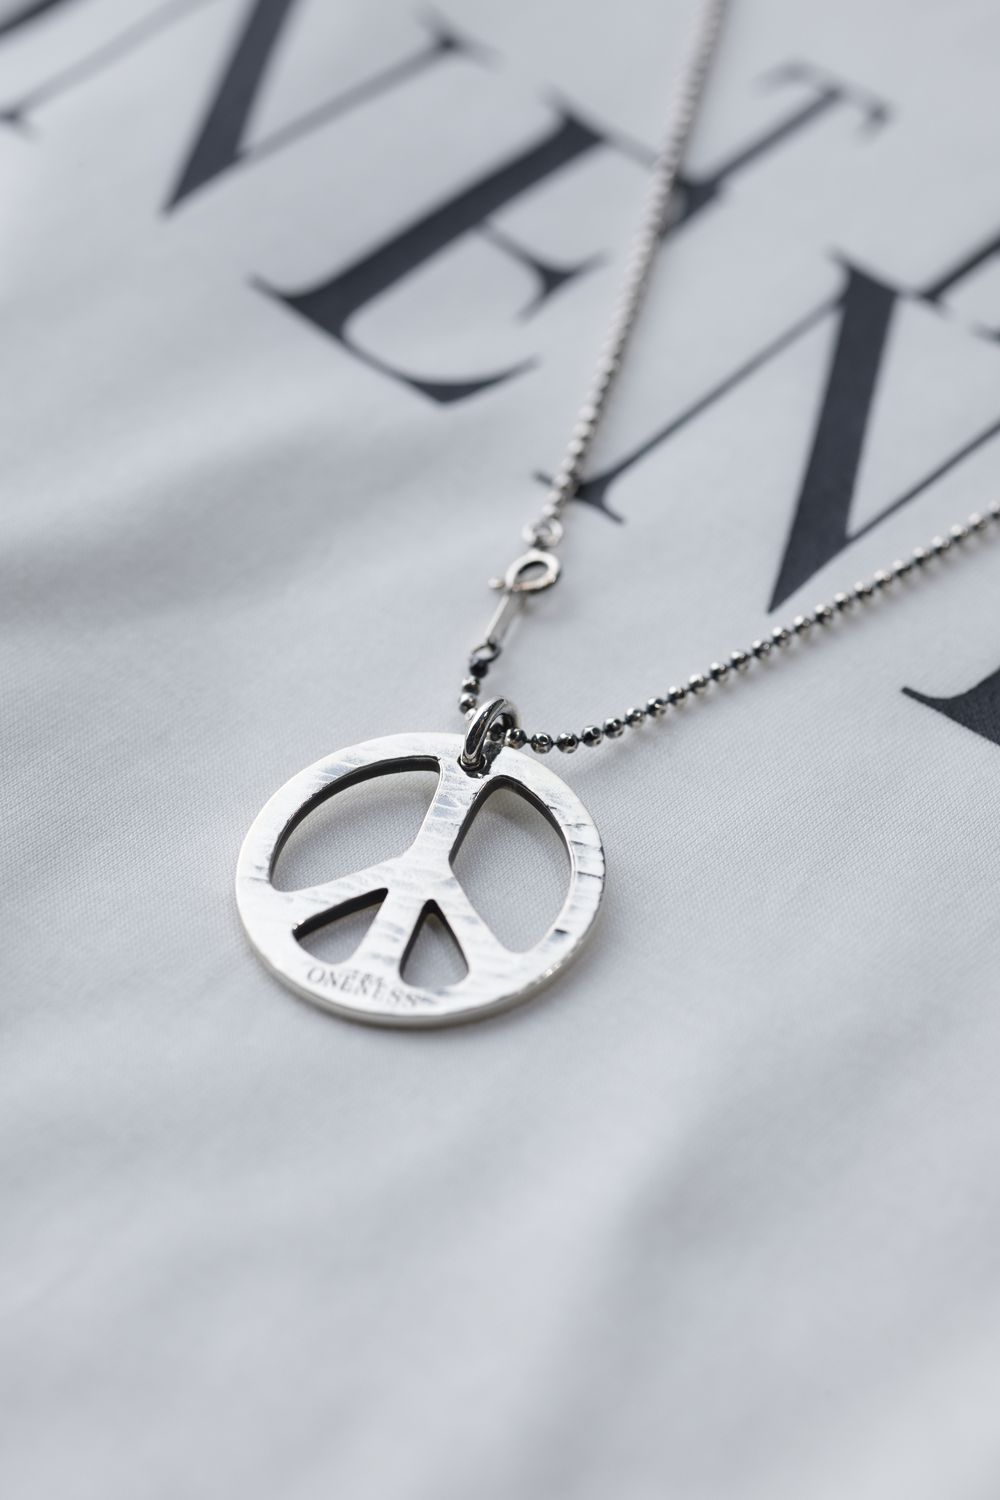 THE ONENESS - SGZ-PEACE Necklace / SUGIZO ピース ネックレス | laid